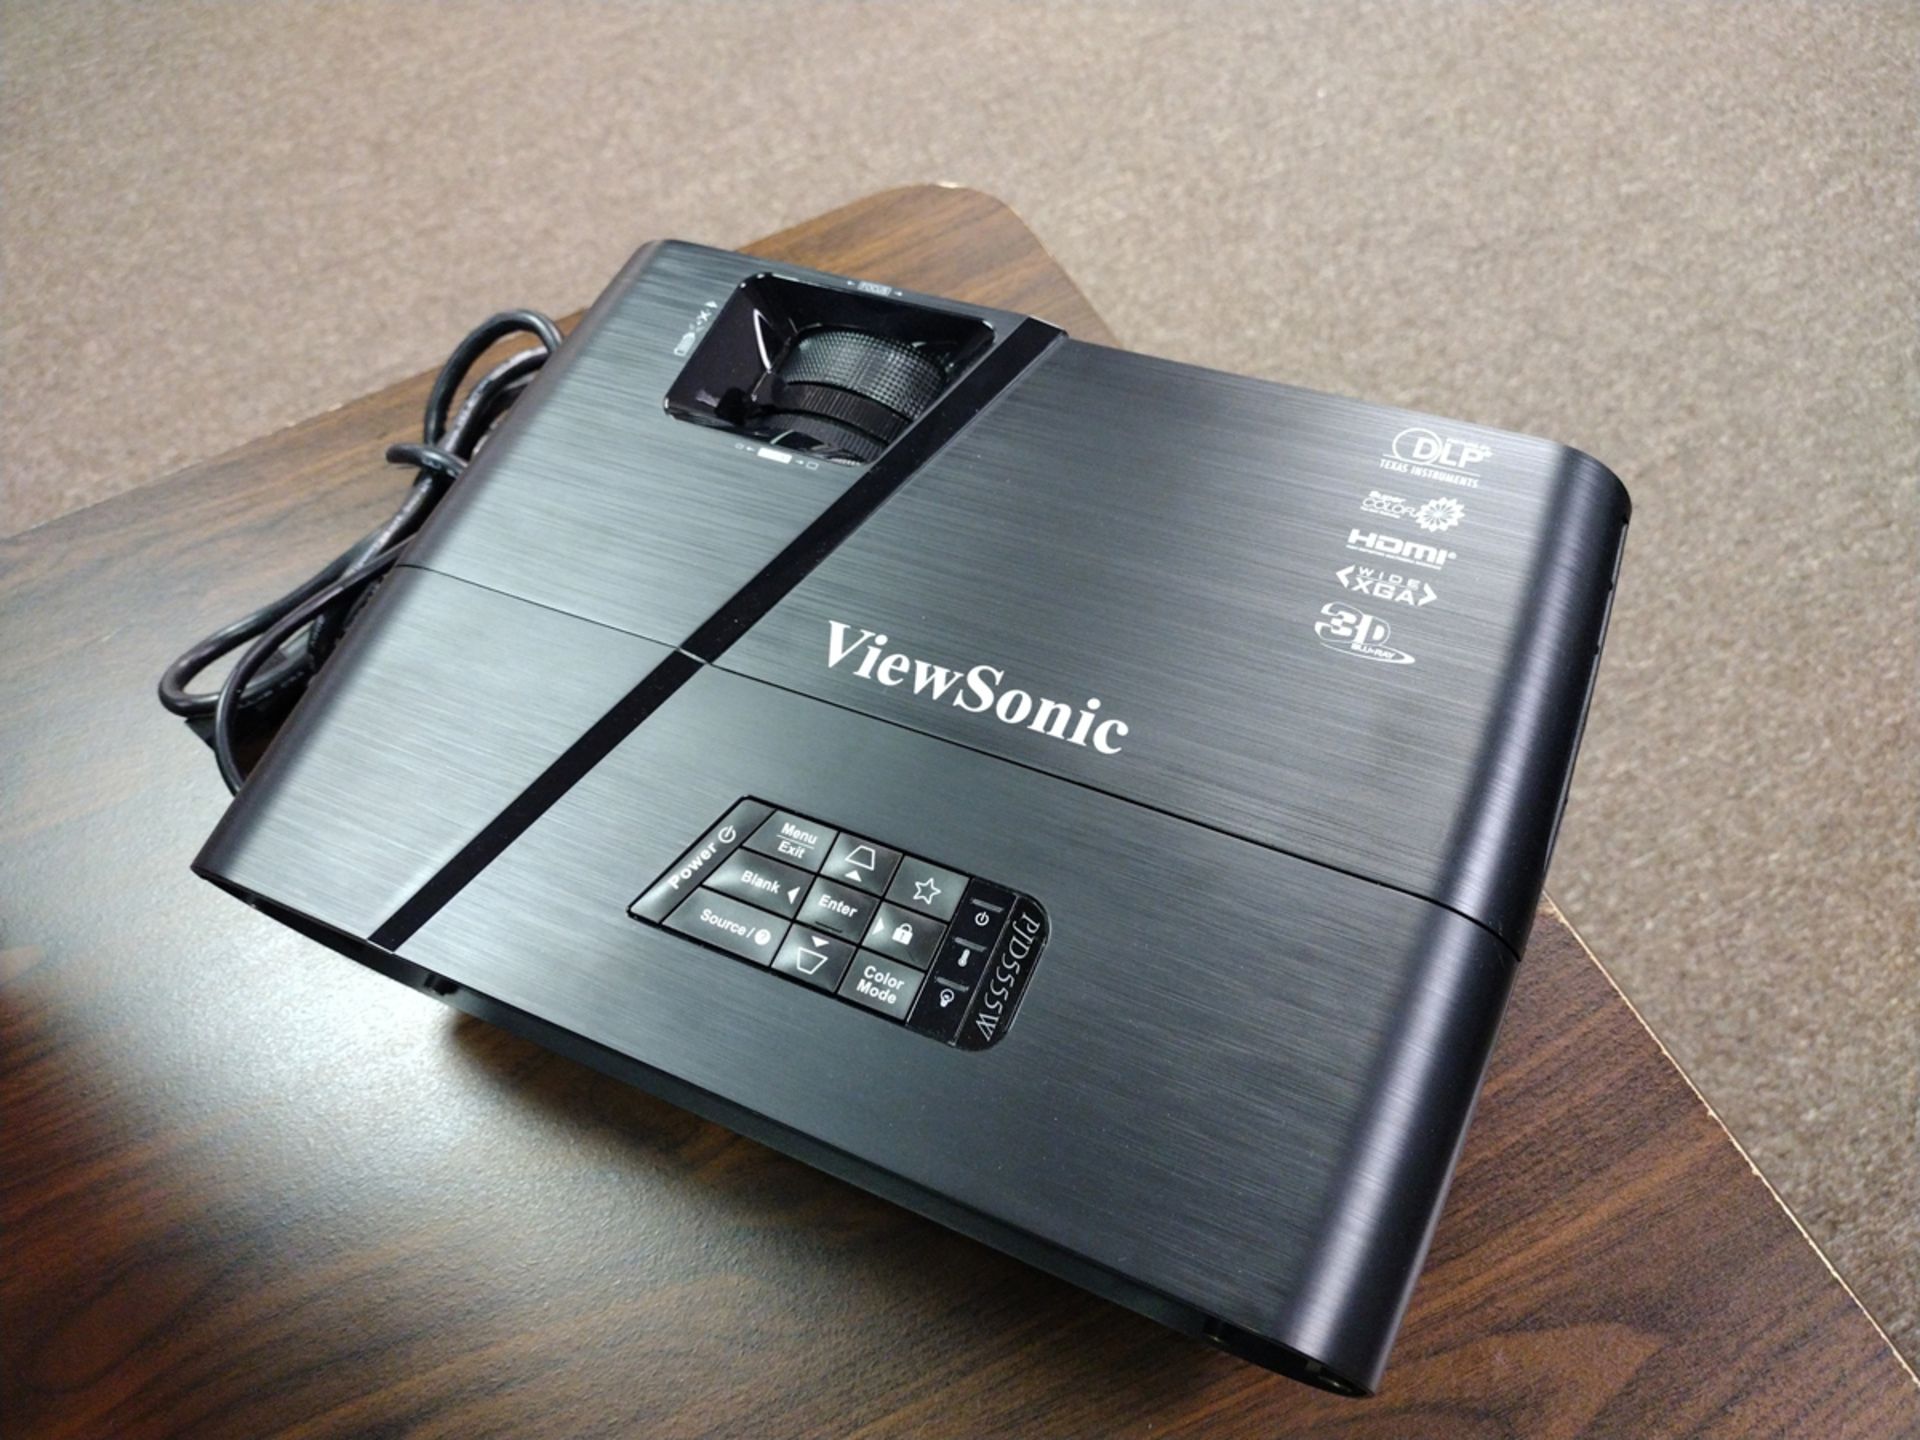 ViewSonic VS15876 DLP Projector - Image 2 of 5